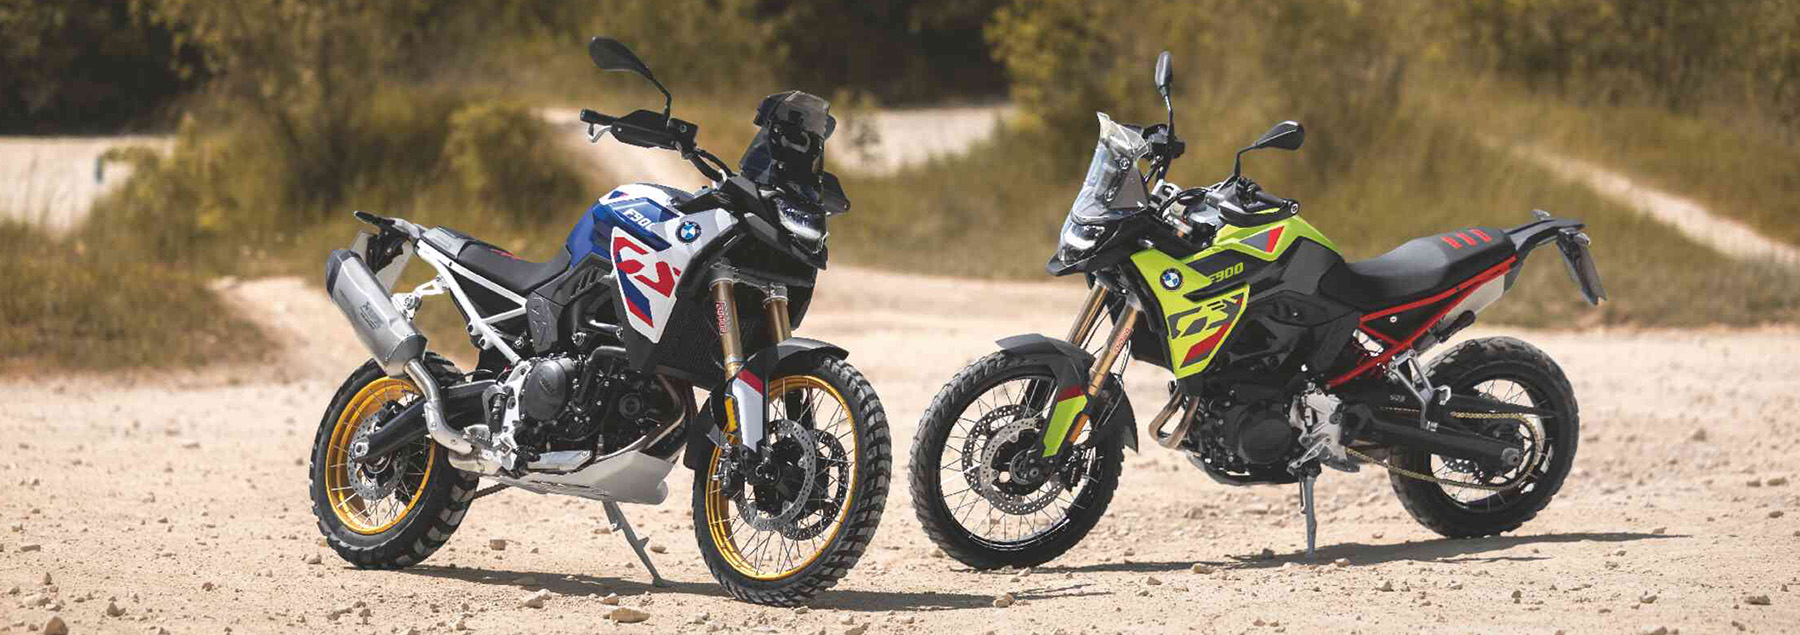 Two BMW Motorcycles standing in a desert in Southern California.